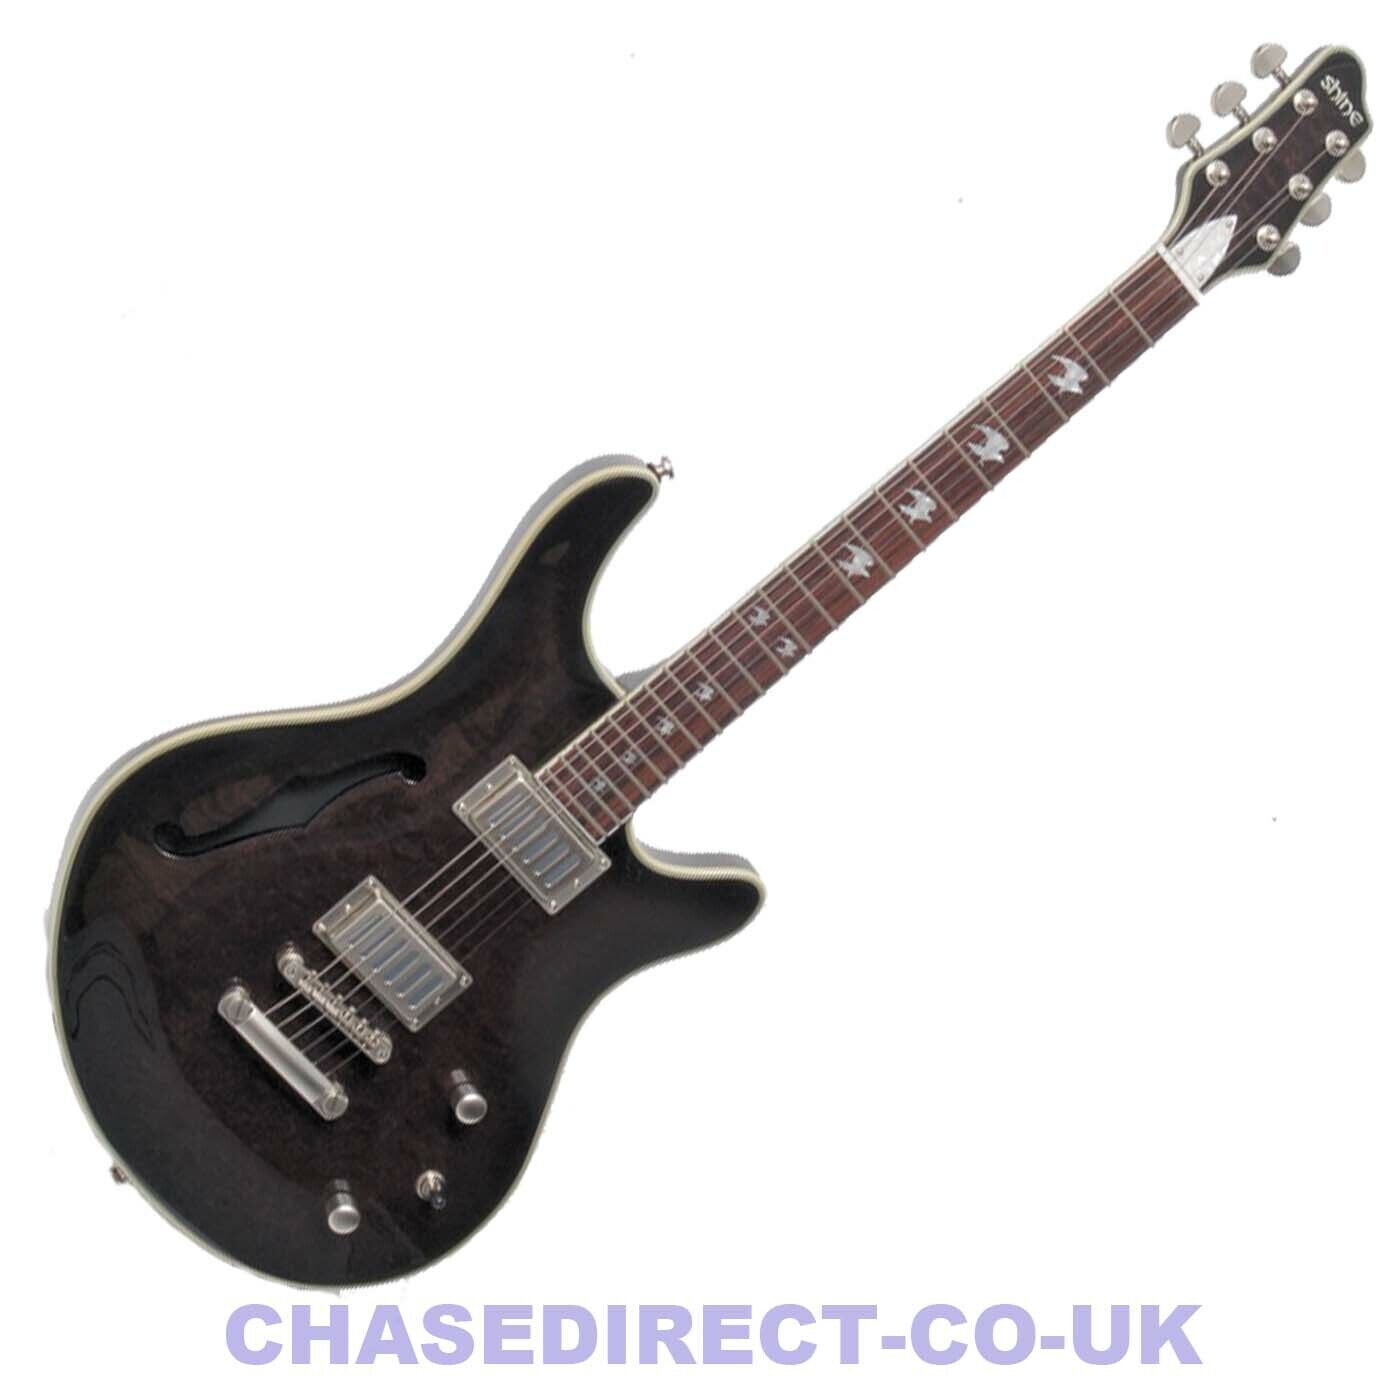 Electric Guitar Shine SIL510 BK Black With F Hole Cut Out Set In Neck  -